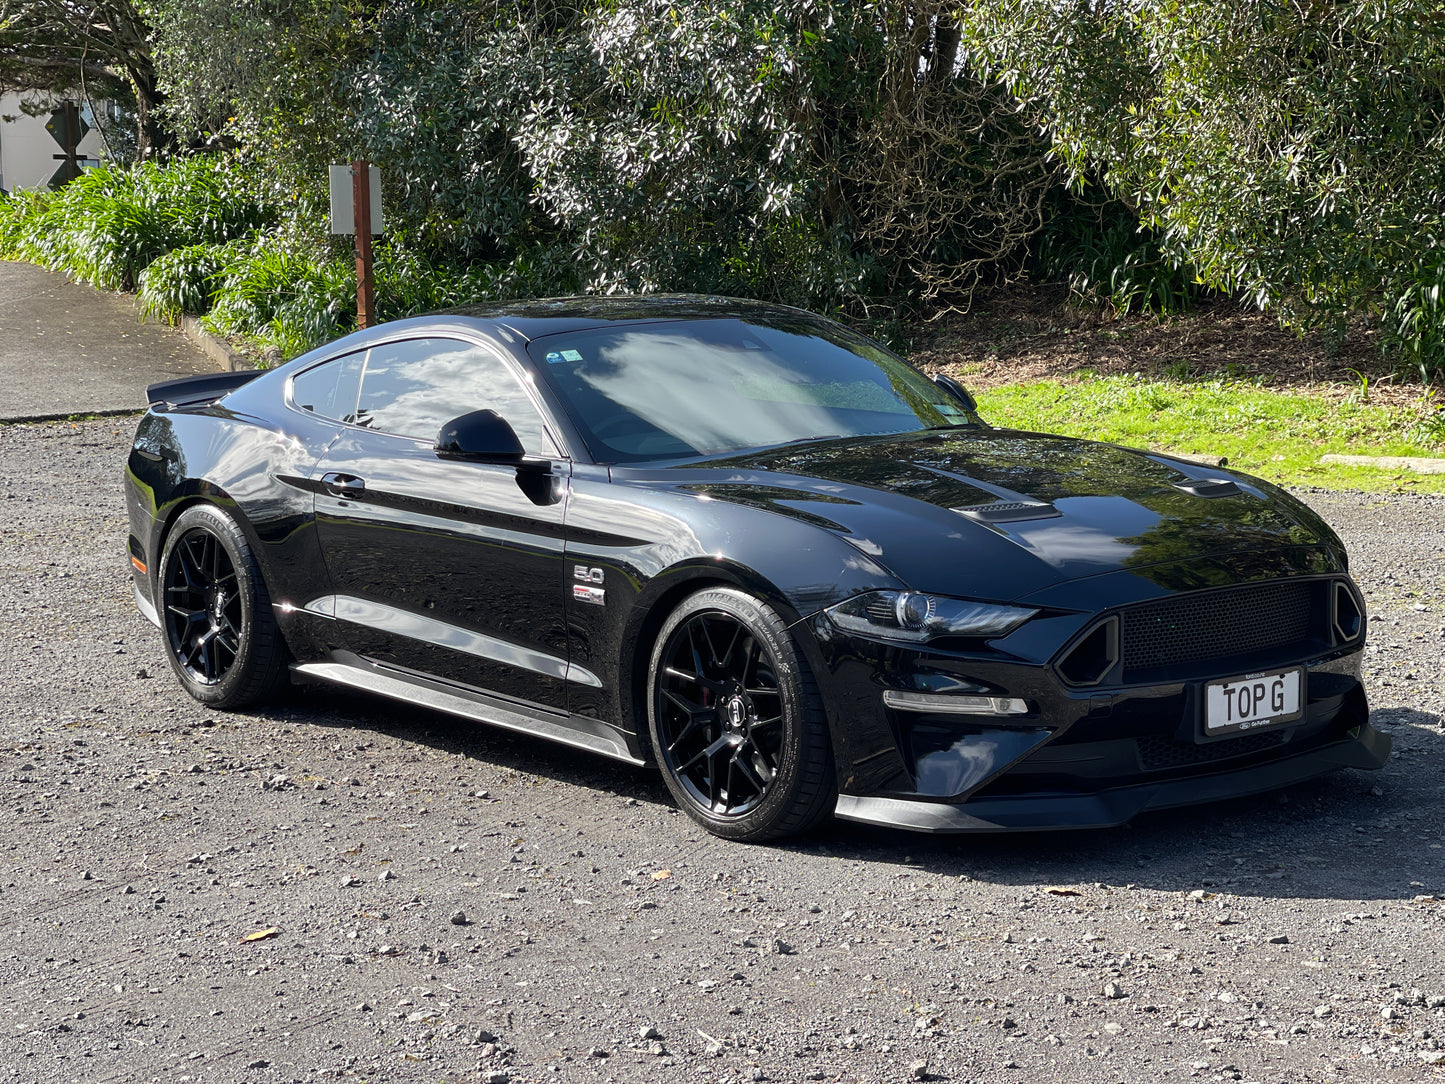 Ford Mustang Fastback 2019 - Supercharged